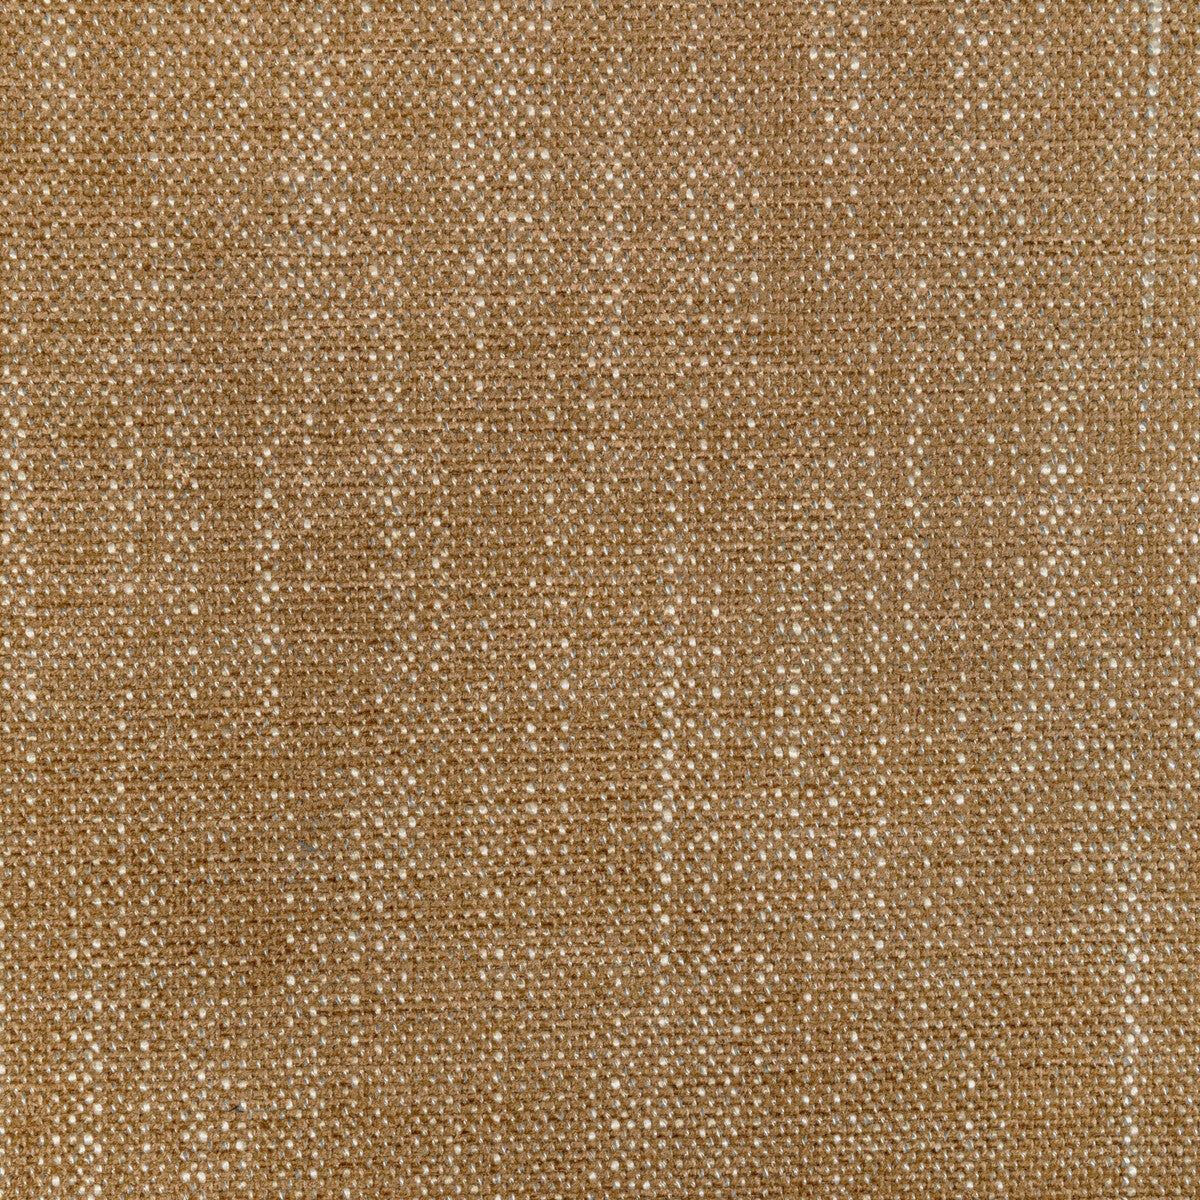 Kravet Design fabric in 36408-6 color - pattern 36408.6.0 - by Kravet Design in the Performance Crypton Home collection